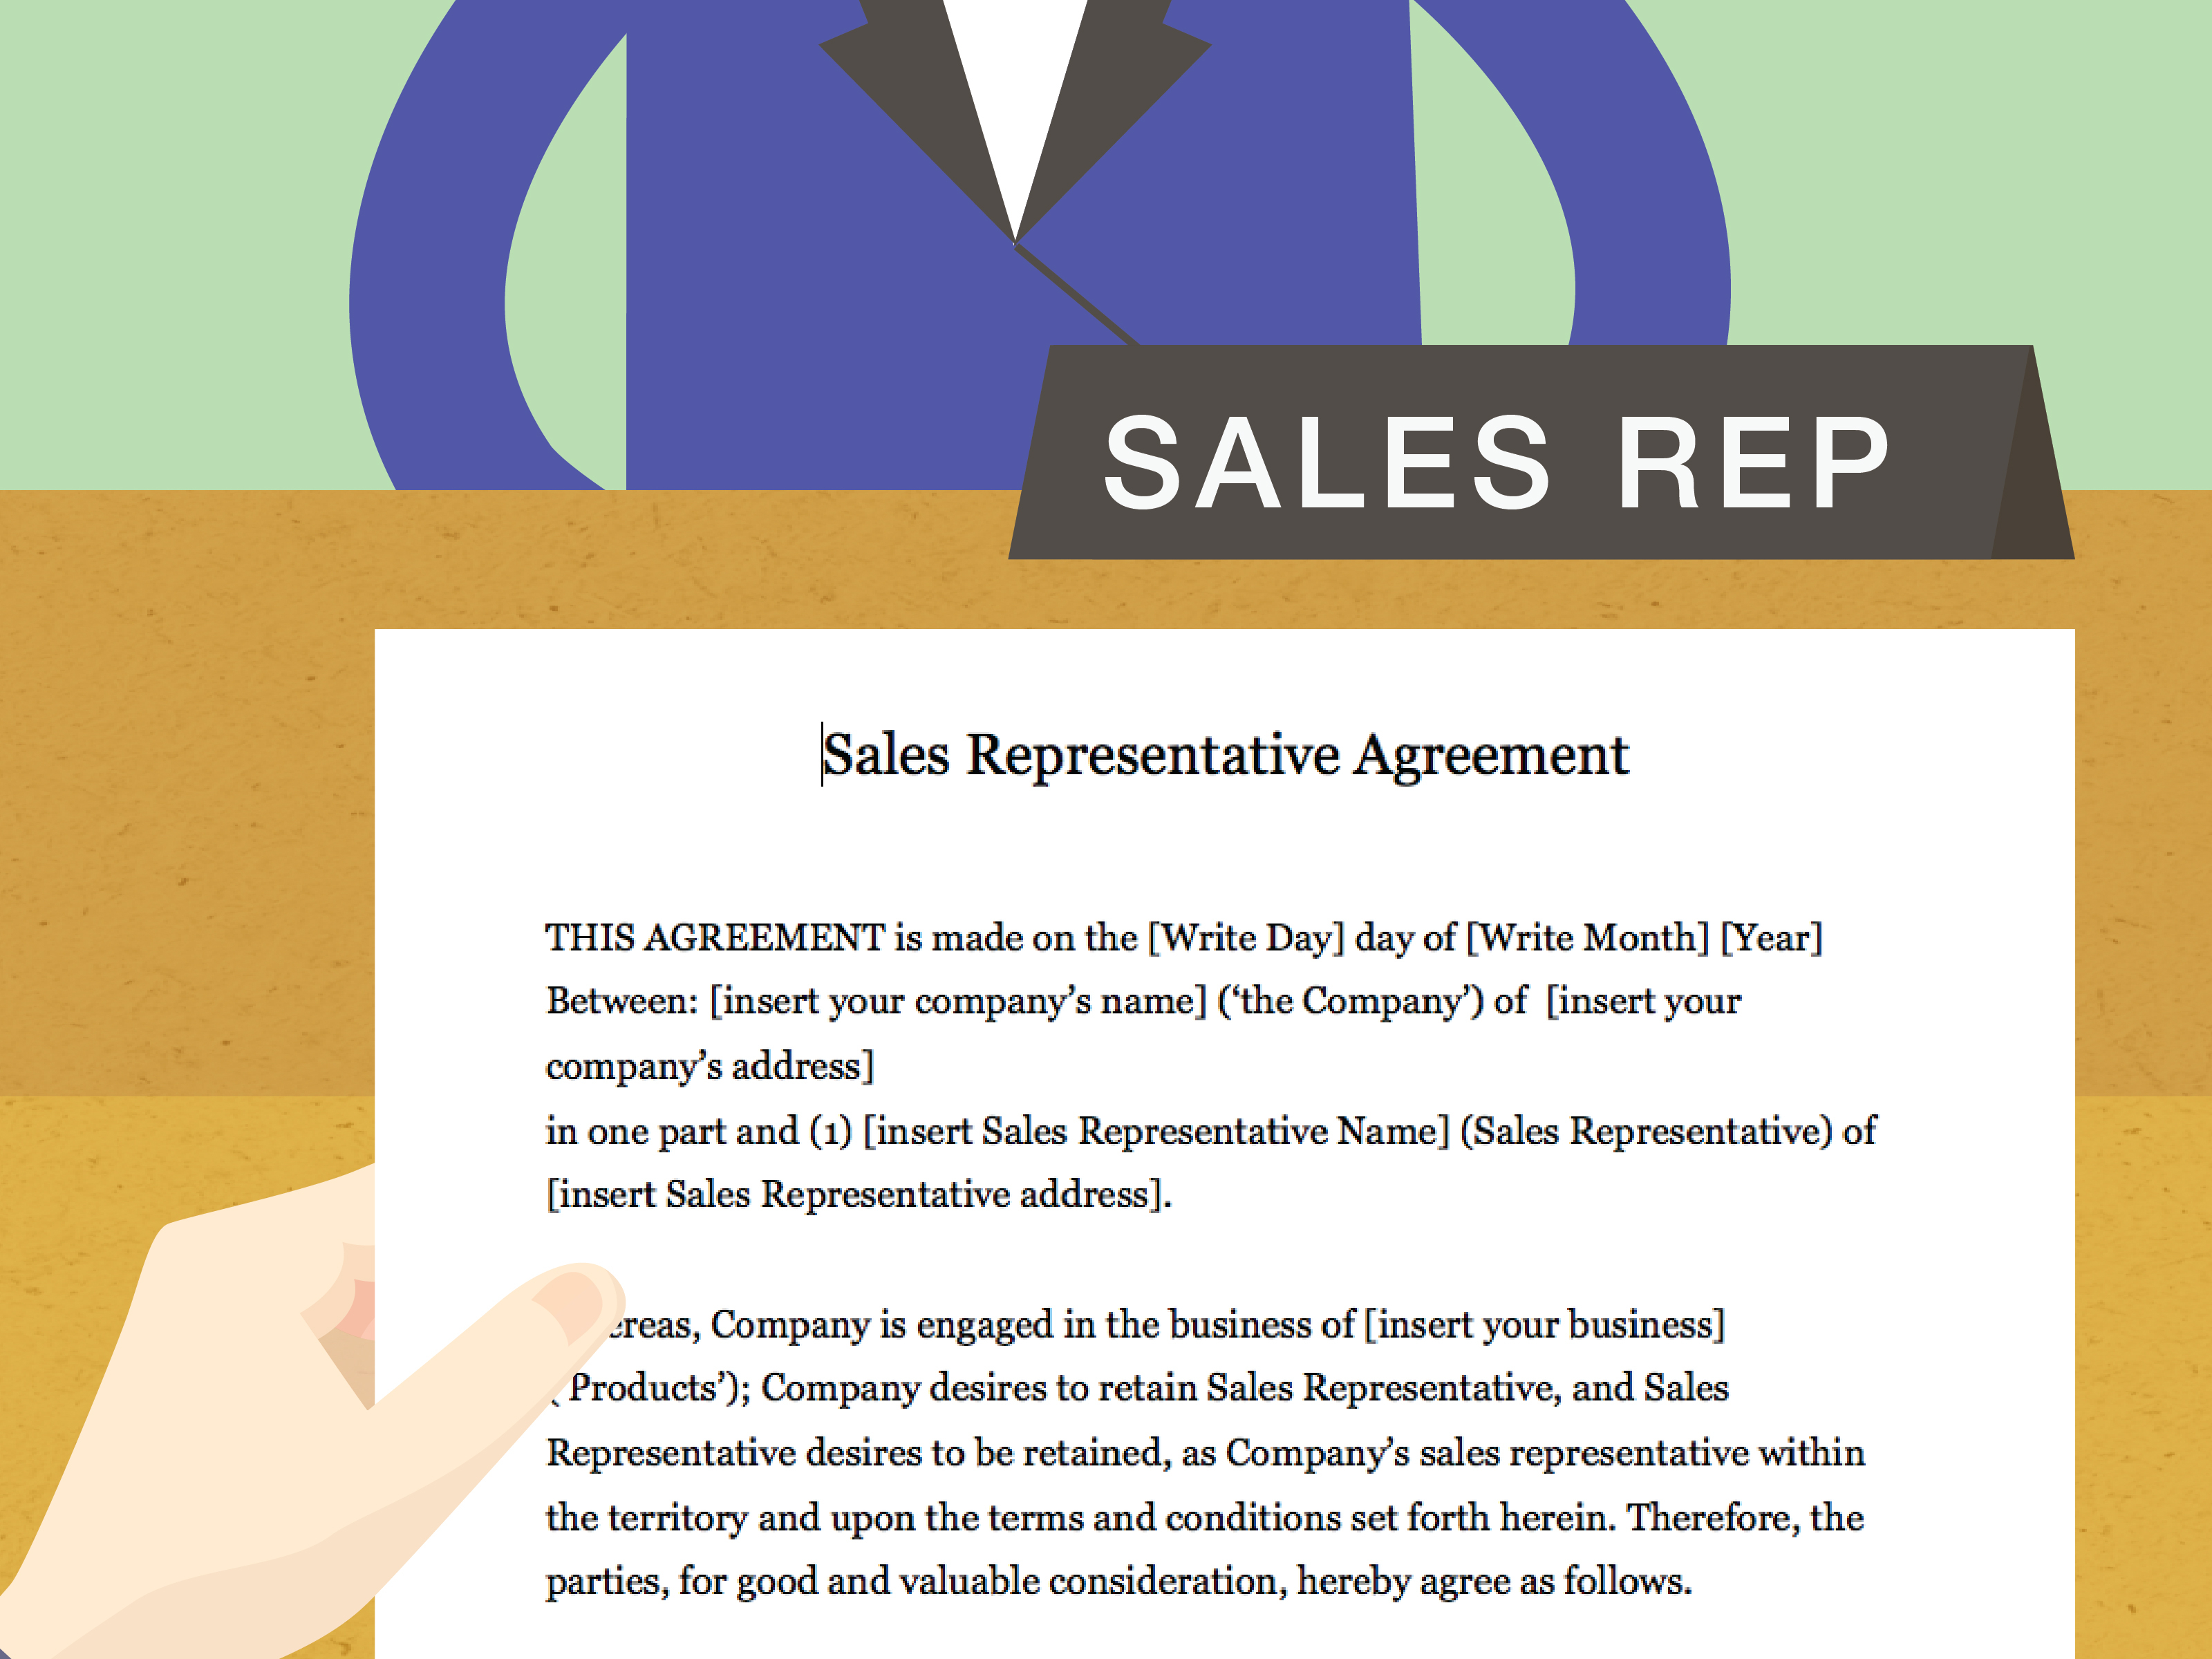 Sales Representative Agreement Template Free How To Draft A Sales Representative Agreement With Pictures